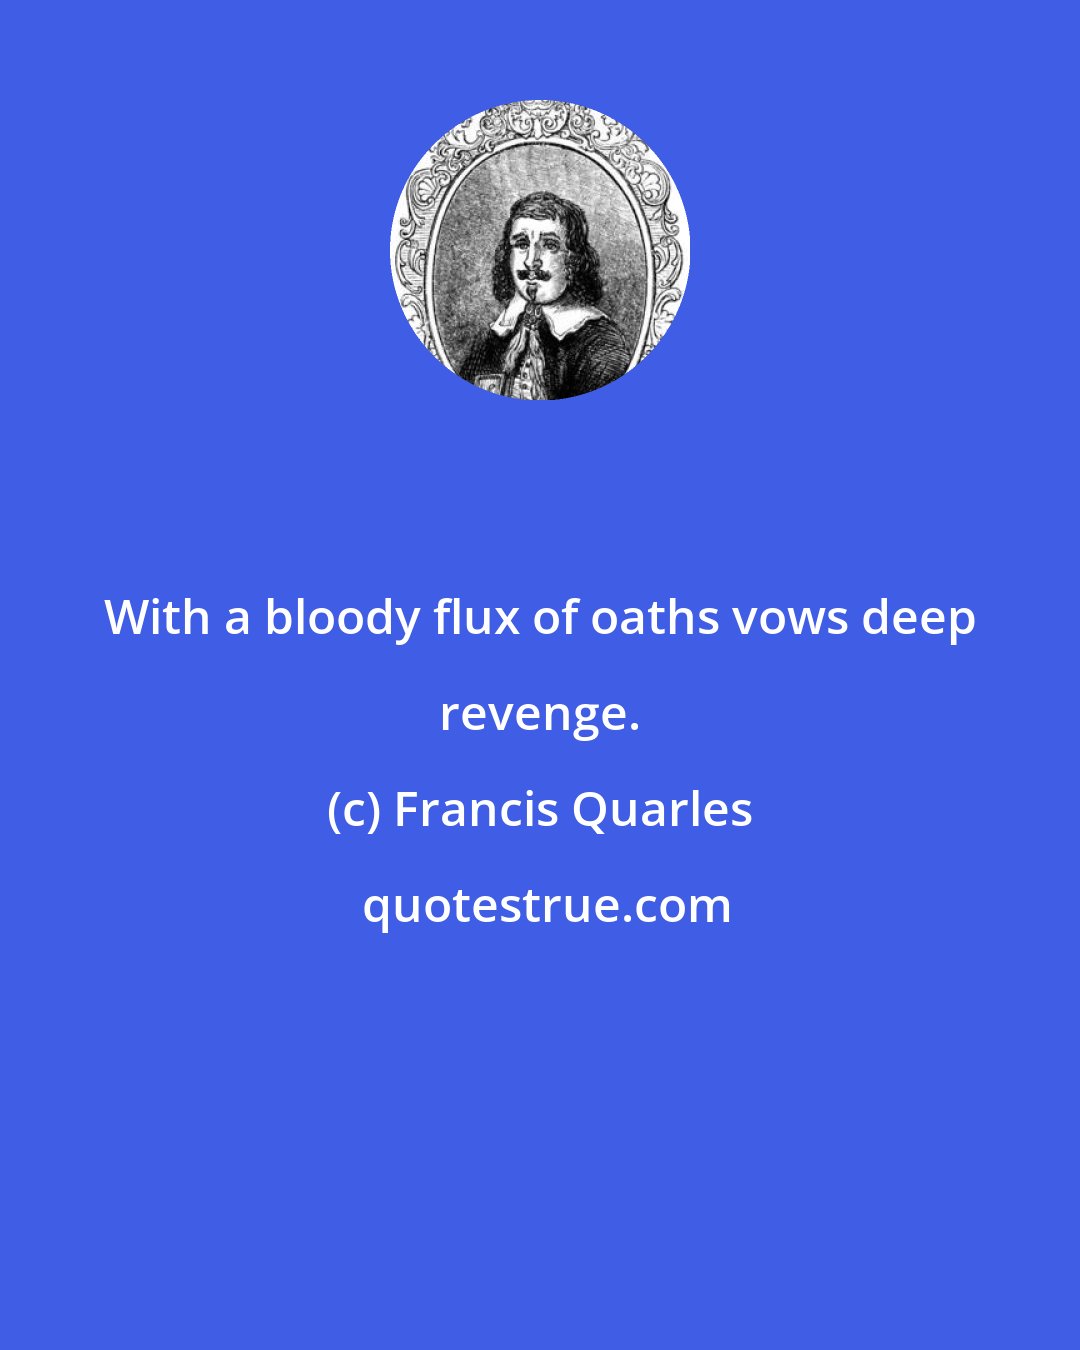 Francis Quarles: With a bloody flux of oaths vows deep revenge.